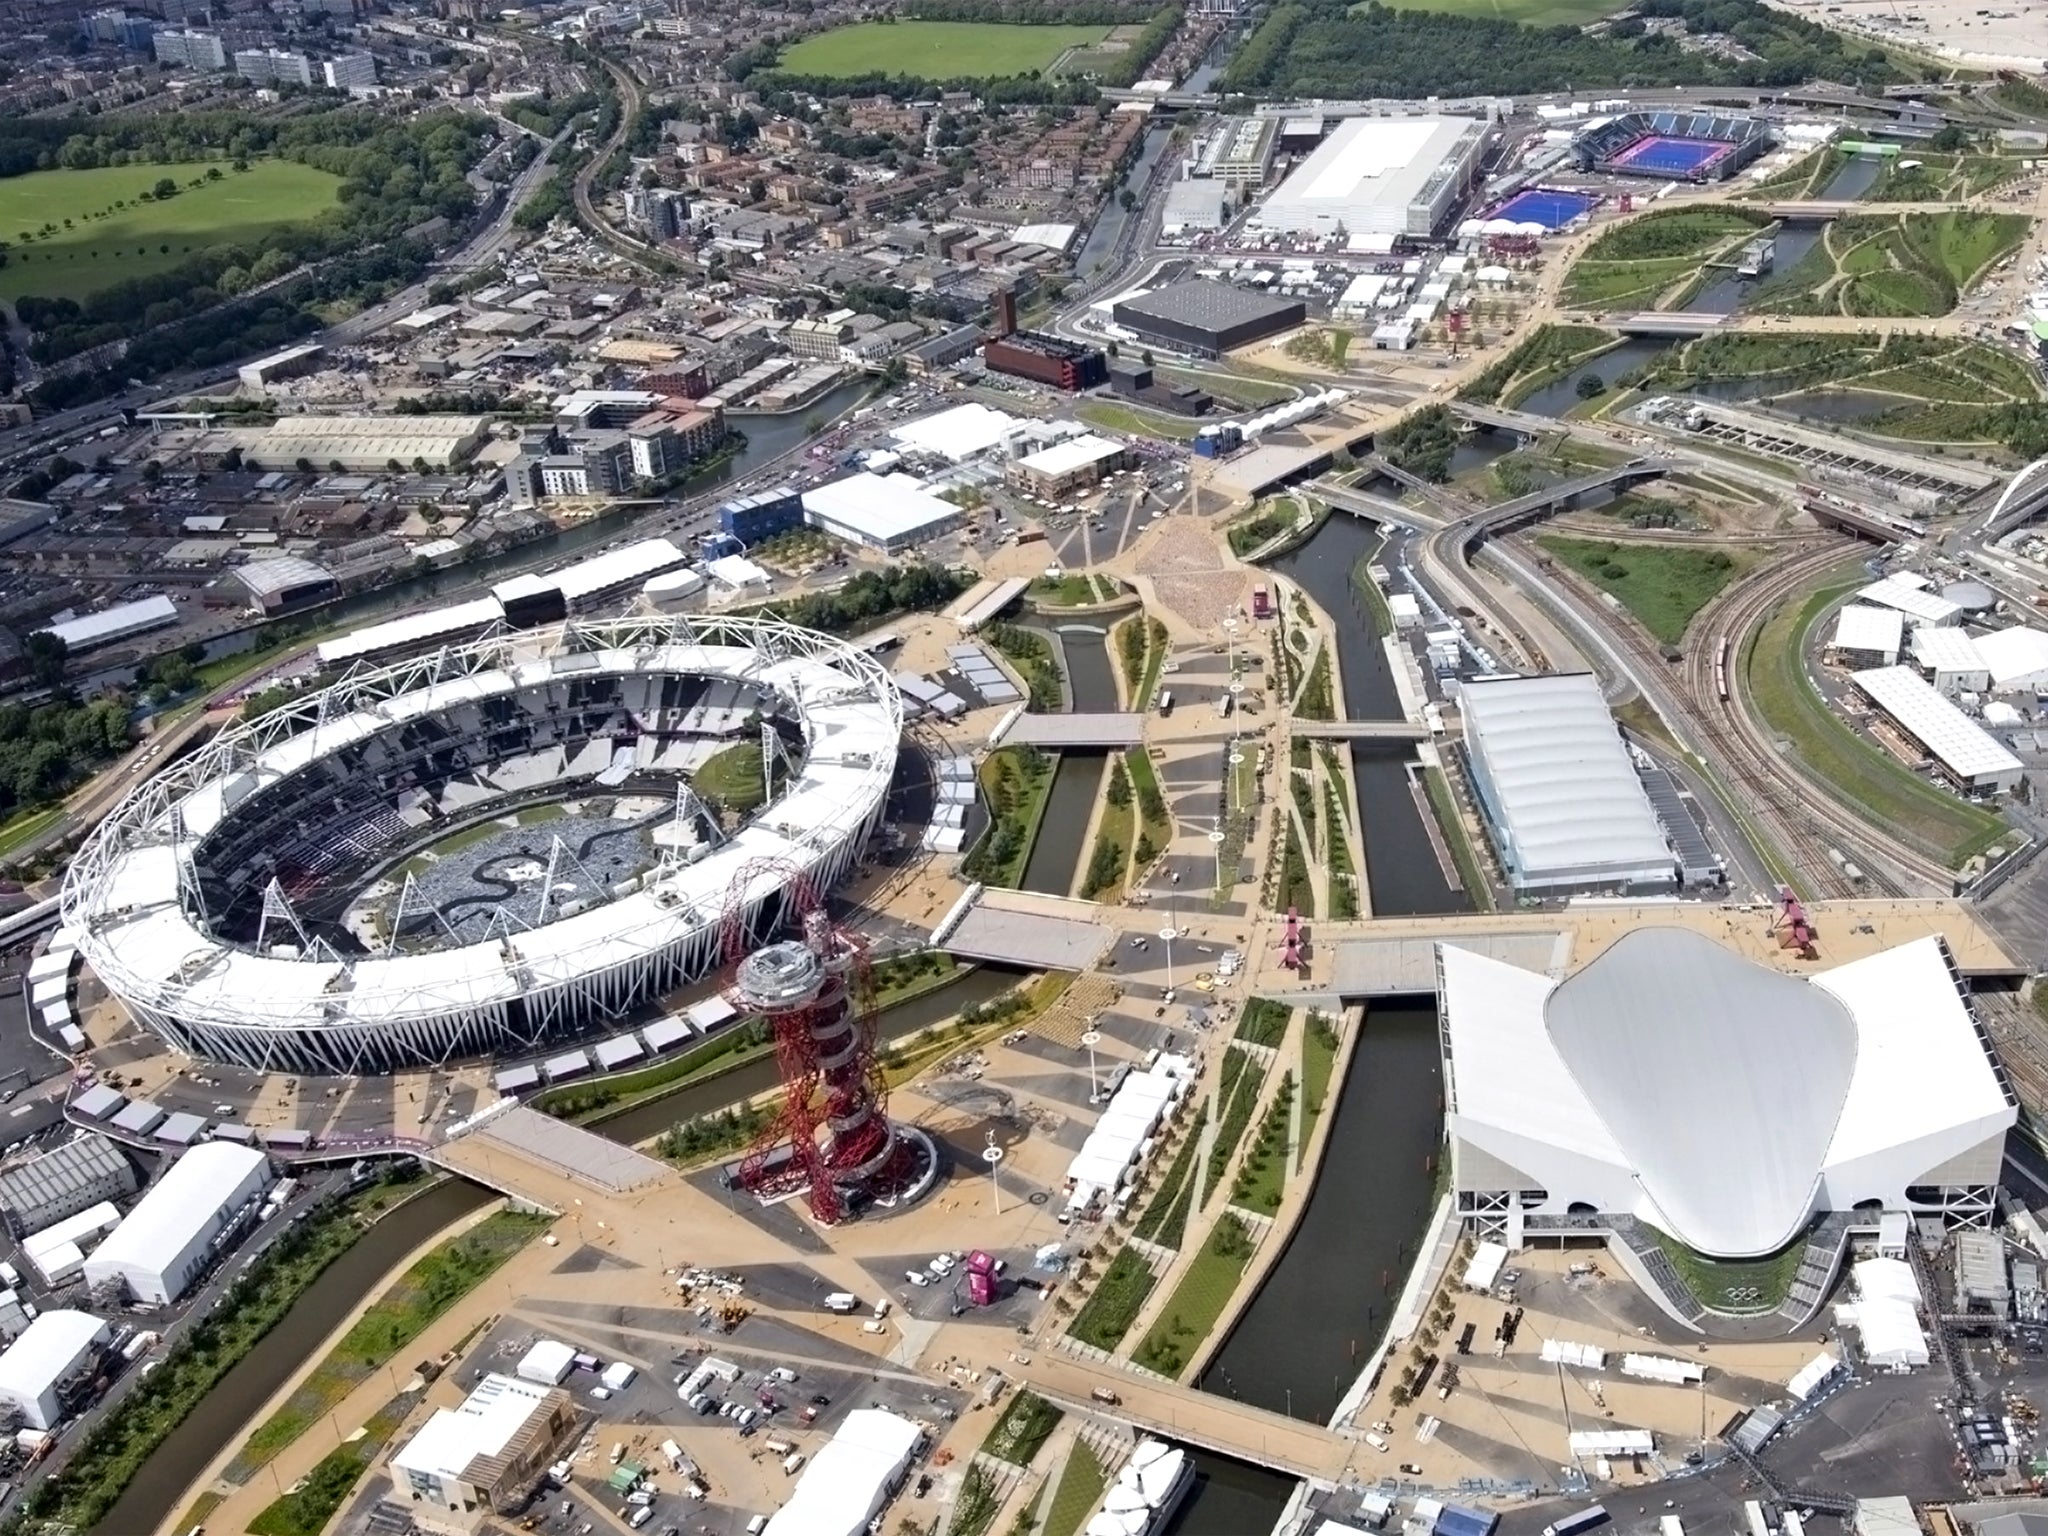 The Olympic Park site in Stratford, East London